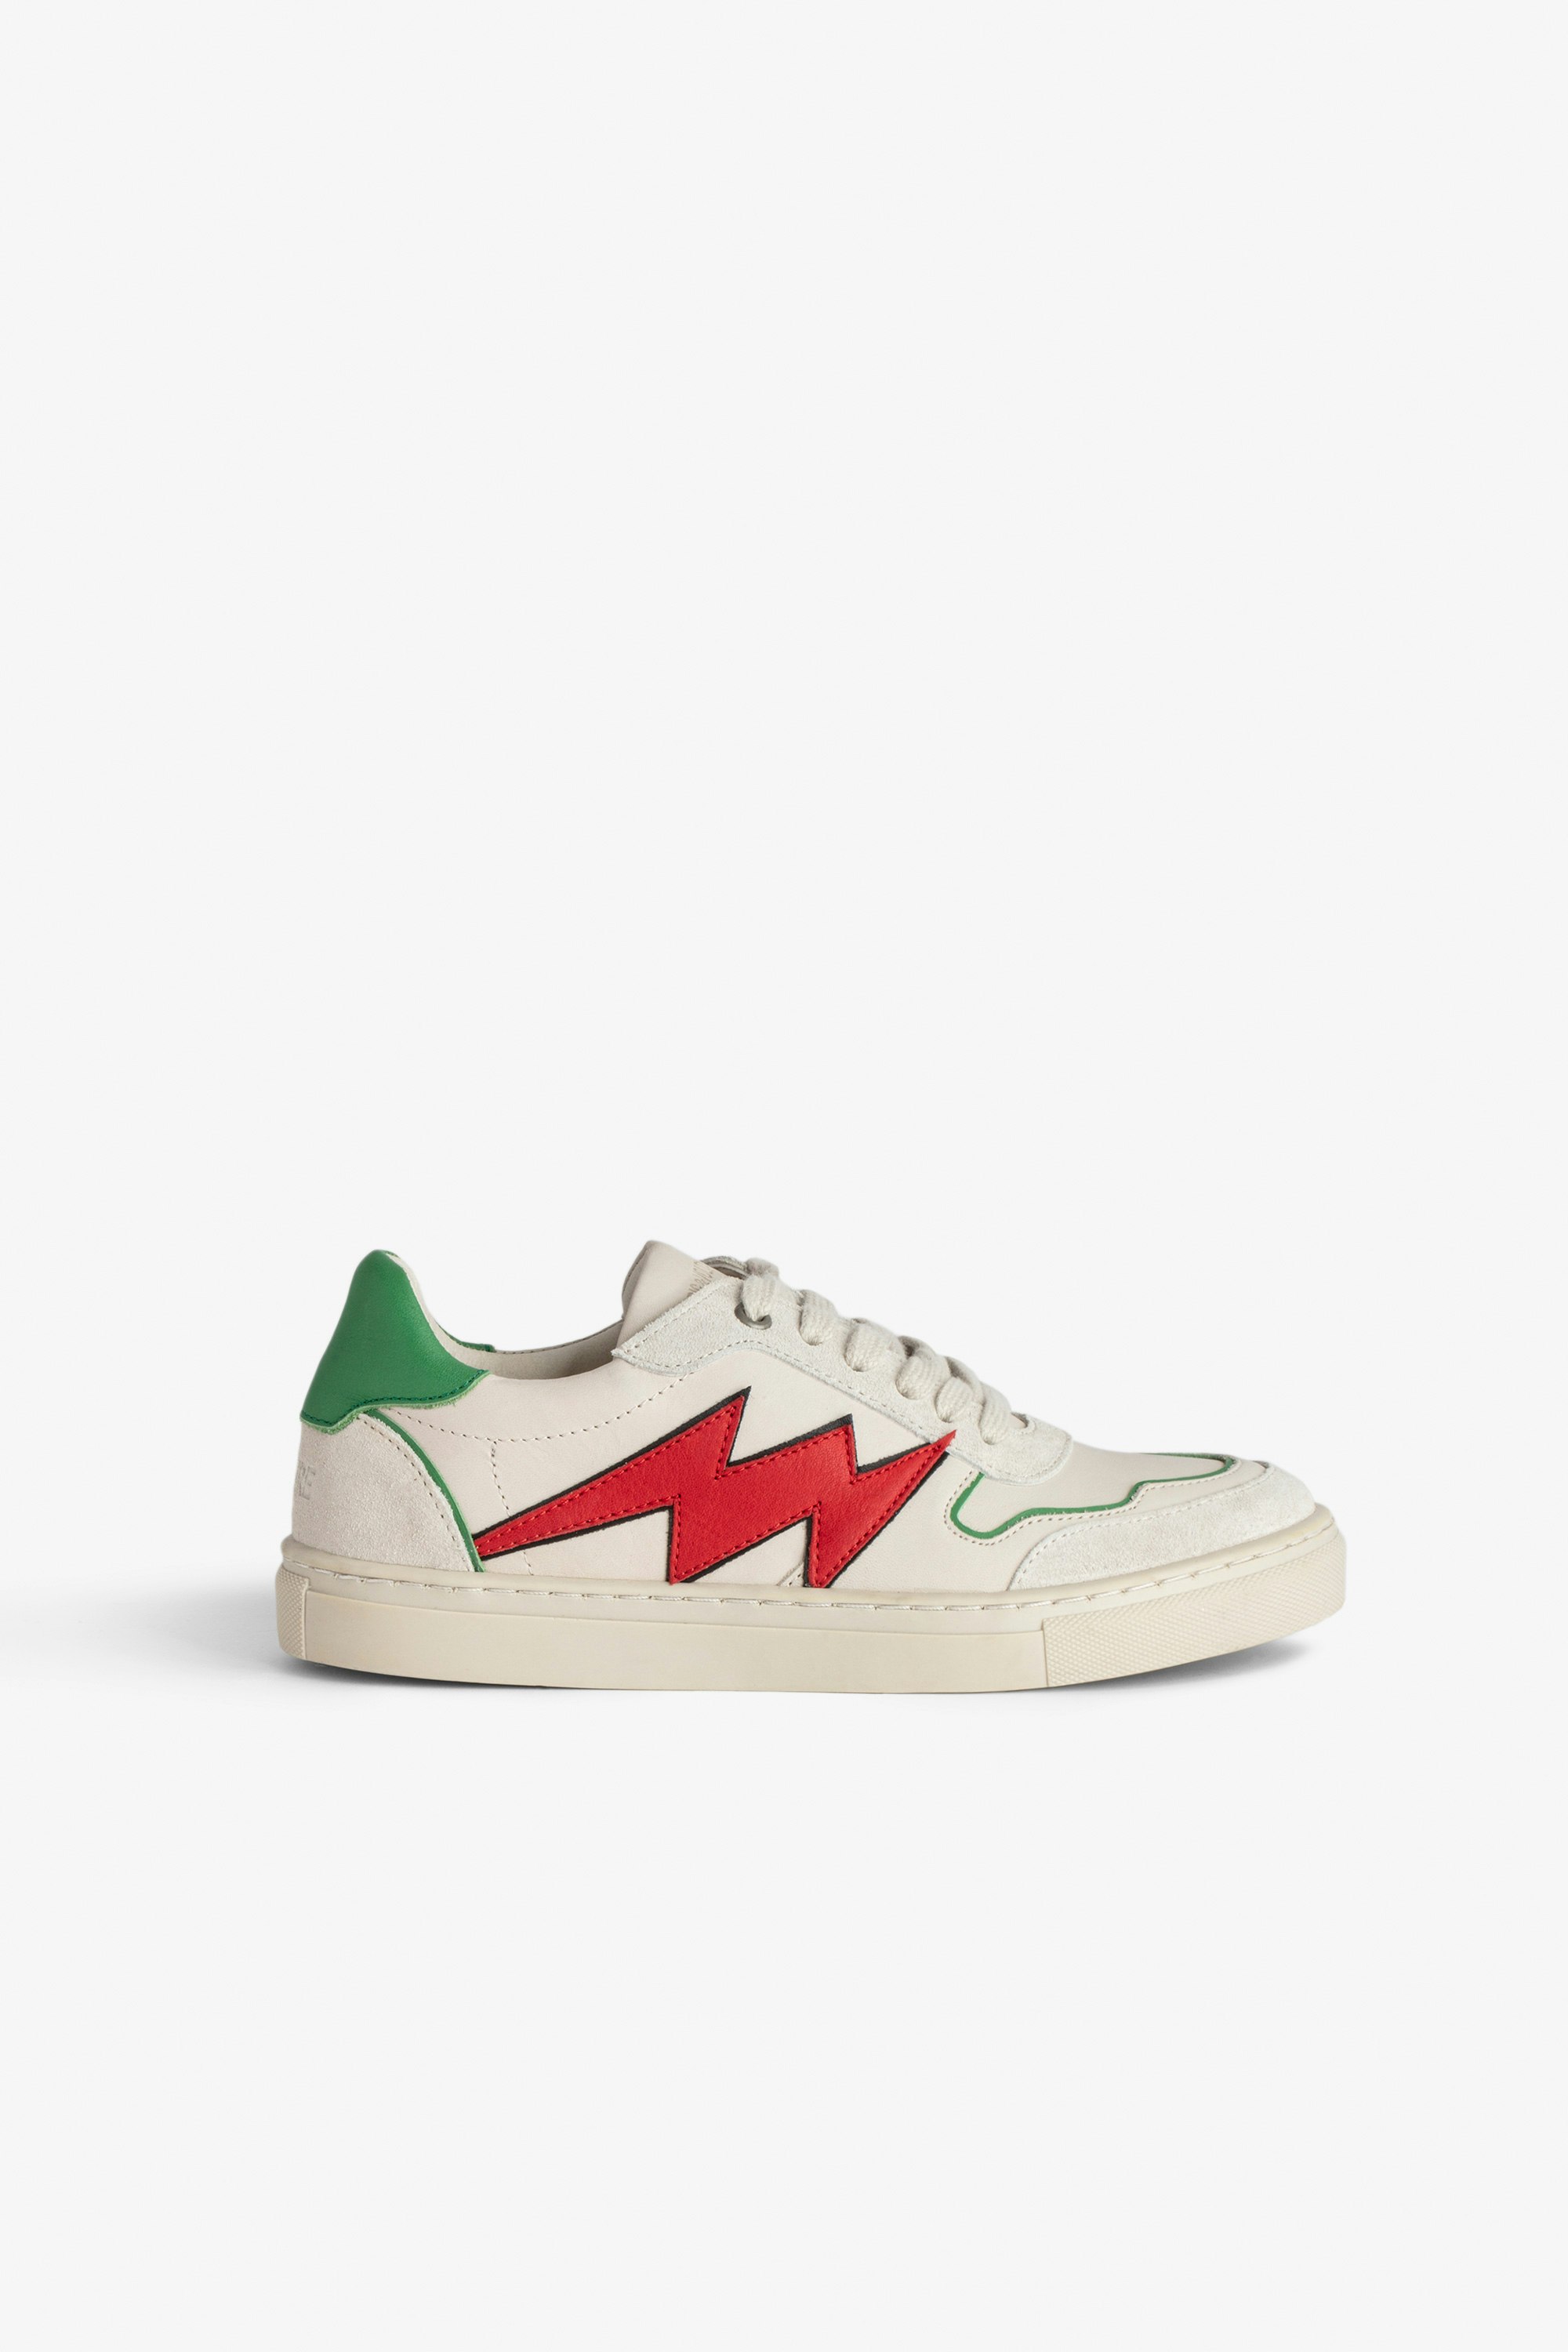 ZV1747 La Flash Boys’ Low-Top Trainers Boys’ white leather and suede low-top trainers with contrasting lightning bolt.